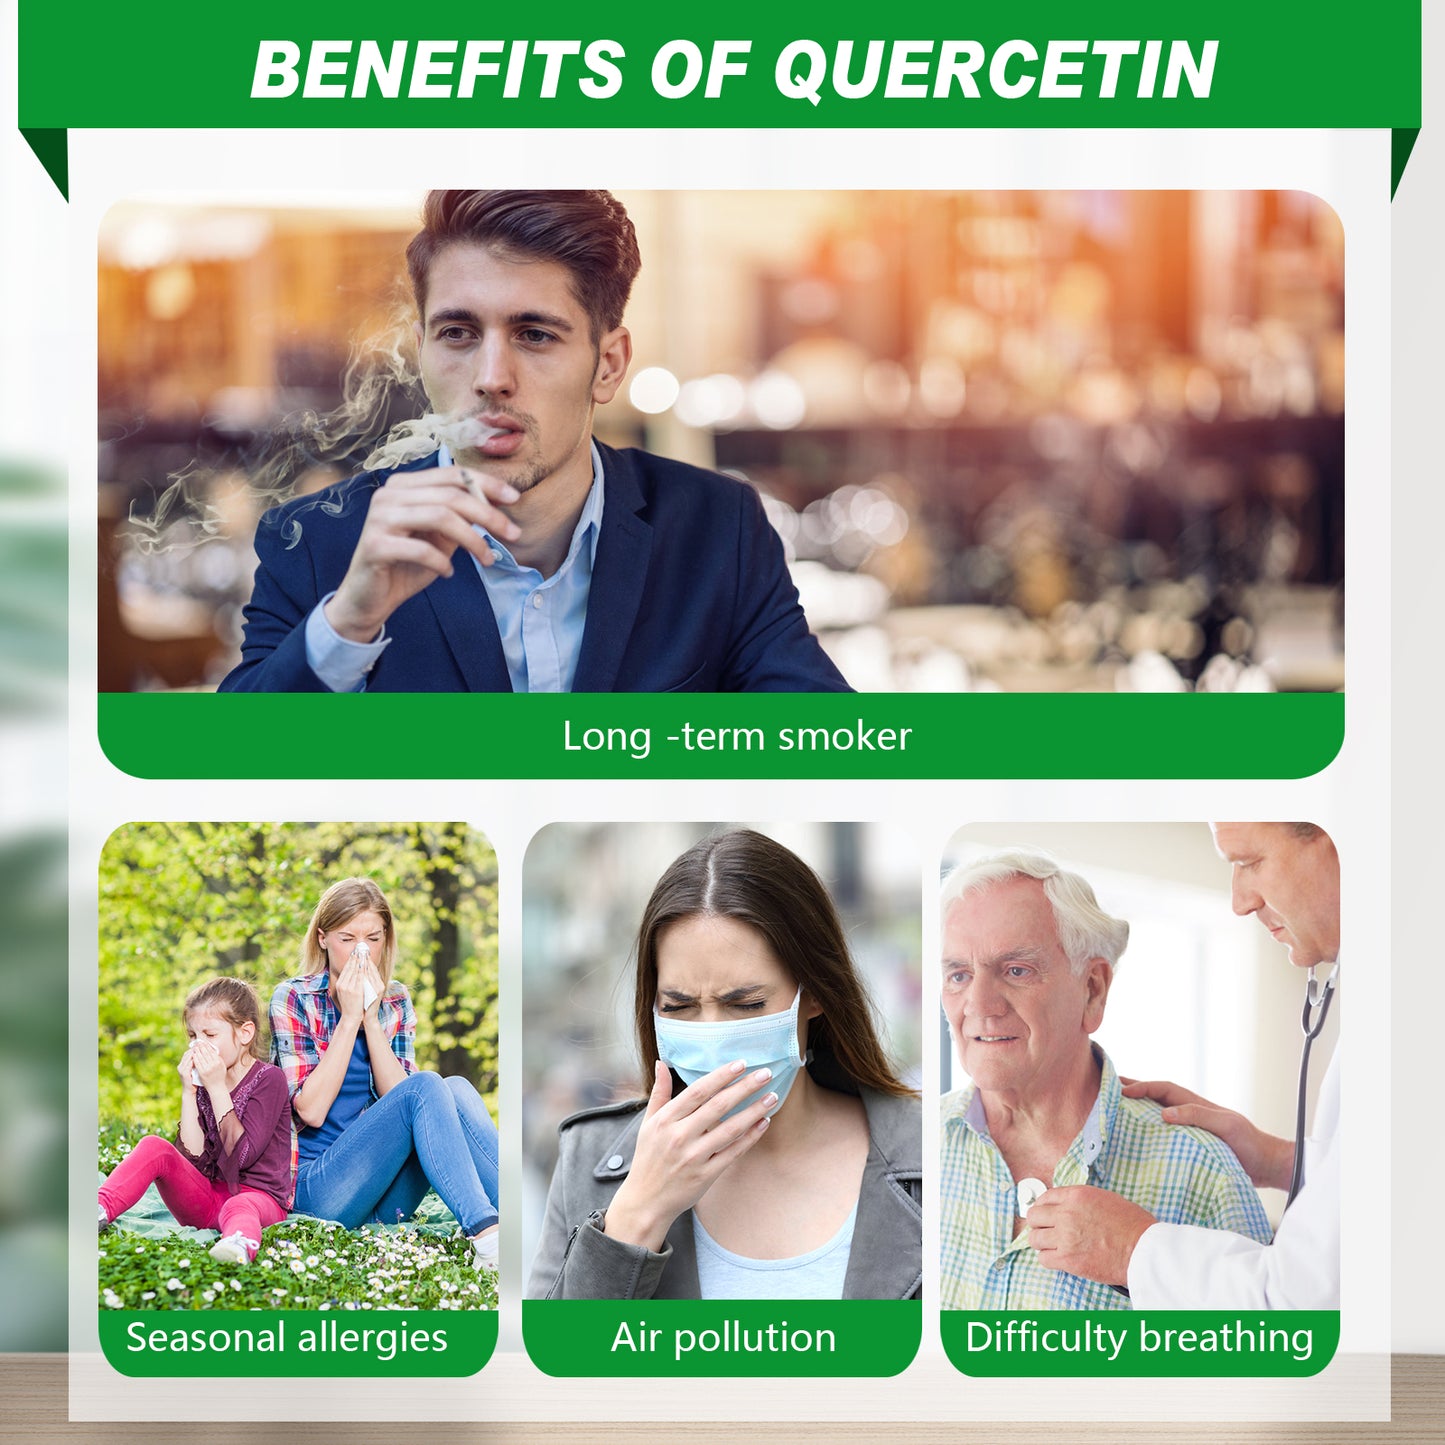 OMOGS Quercetin 300mg with Loquat Leaf Extract ,Y-aminobutyric Acid and Vitamin C, Enhance Immune,Respiratory Health,Antioxidant and Anti-Inflammatory,Natural Non GMO/Non Soy/Gluten Free, 60 Capsules